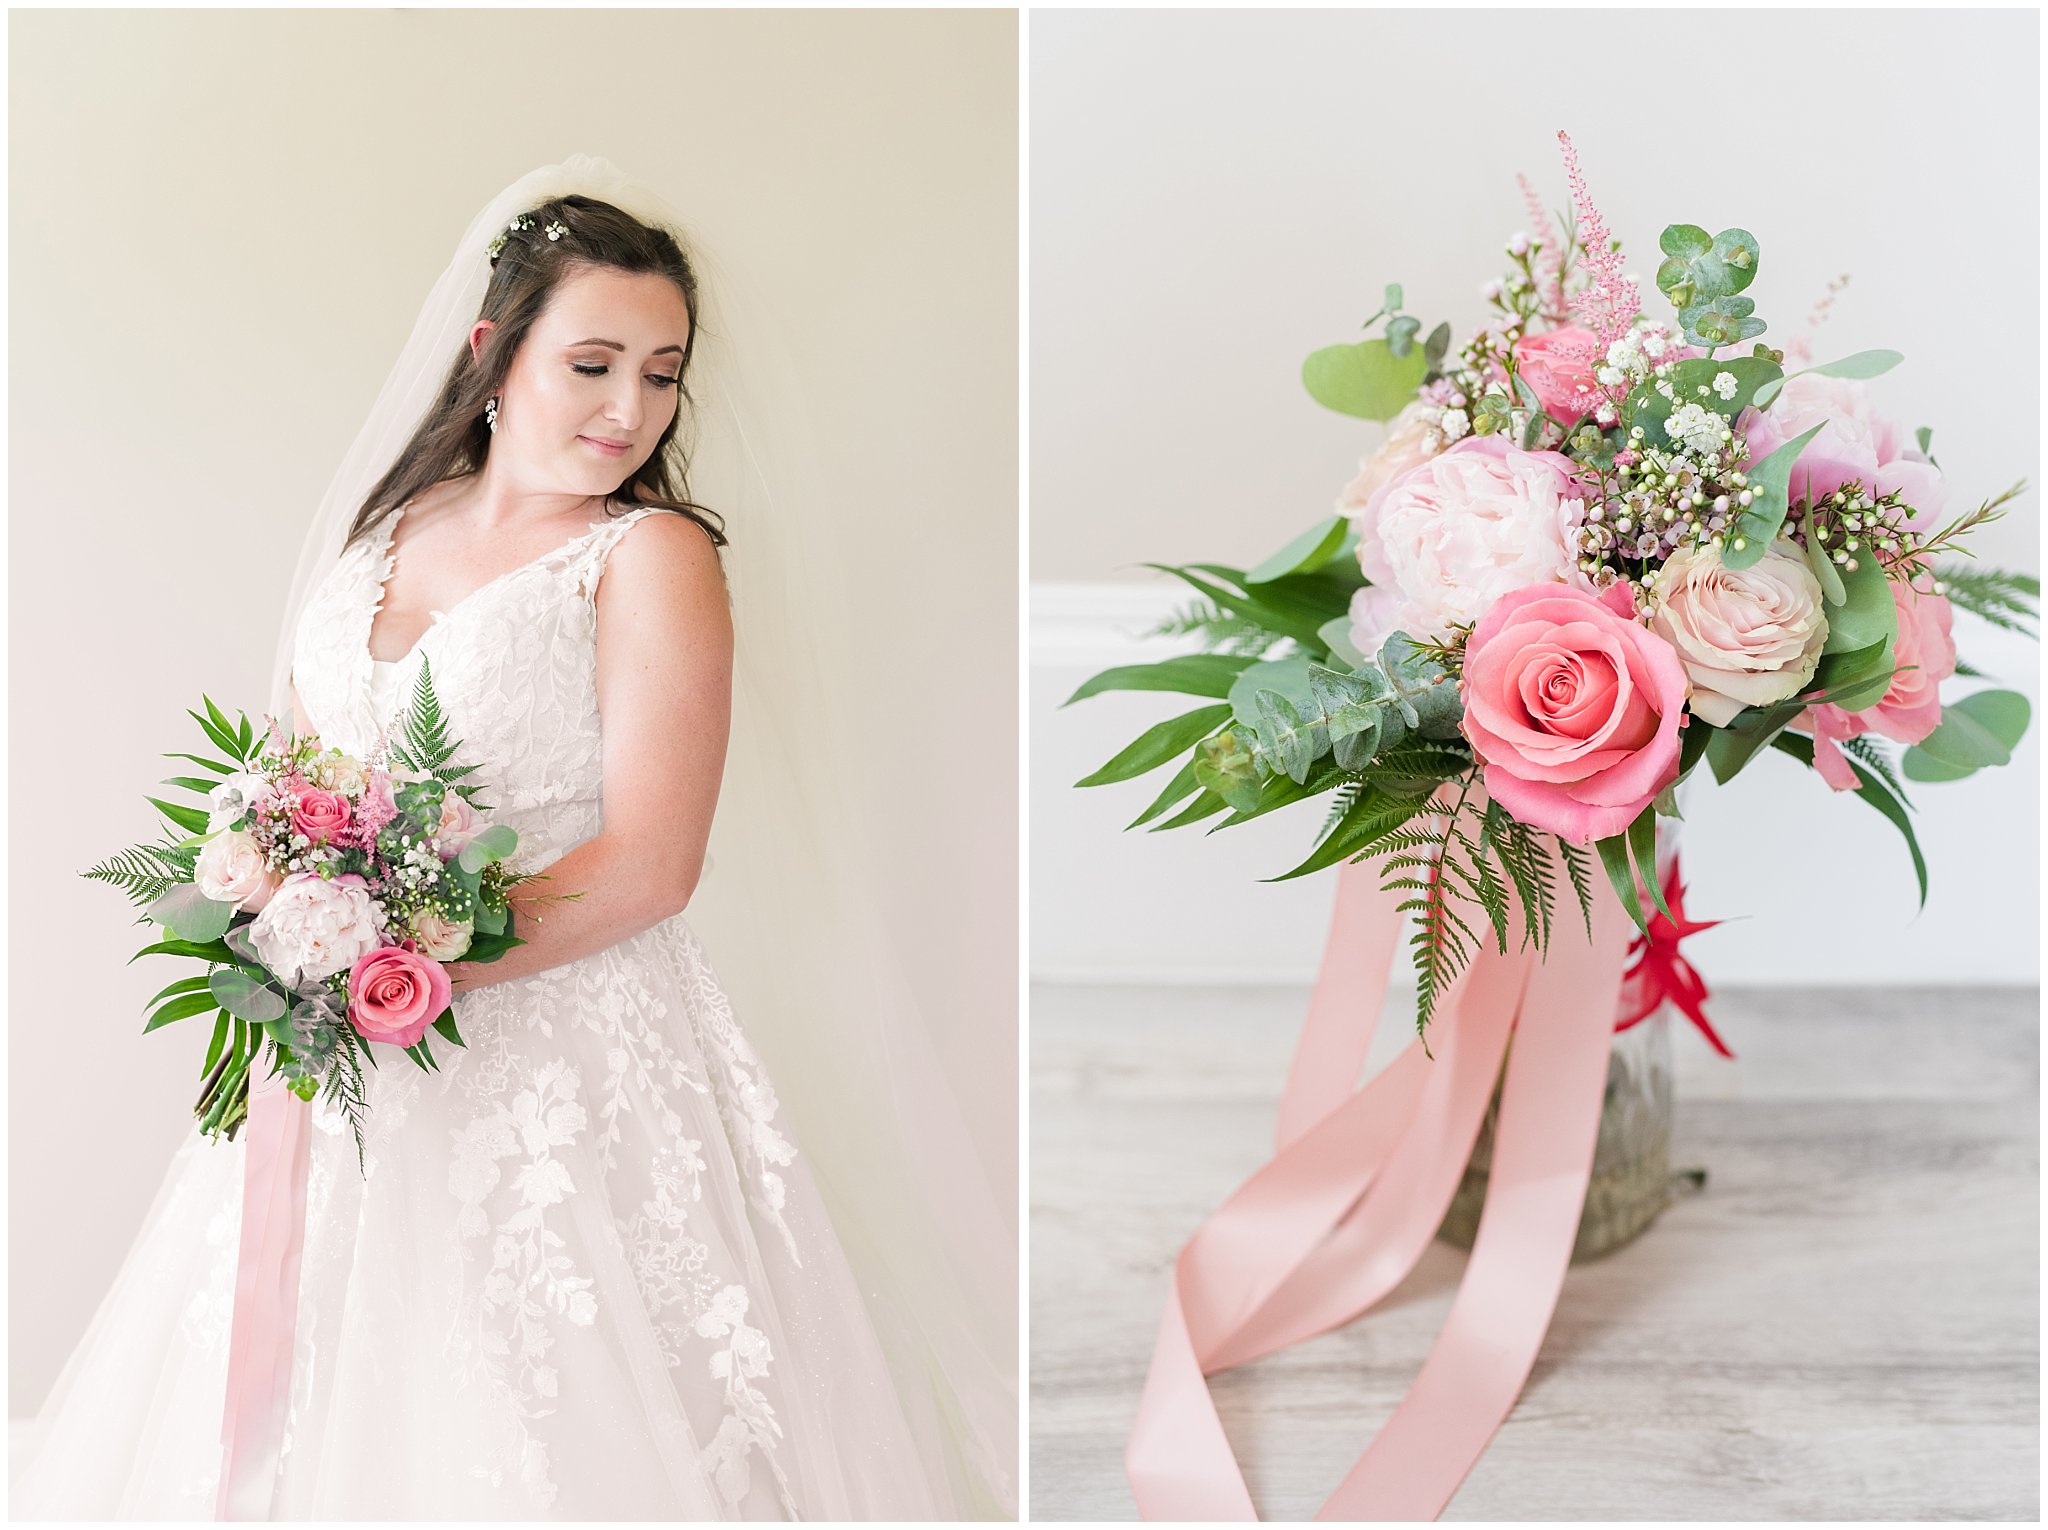 Bride with green, white and pink bouquet | Oak Hills Utah Dusty Rose and Gray Summer Wedding | Jessie and Dallin Photography